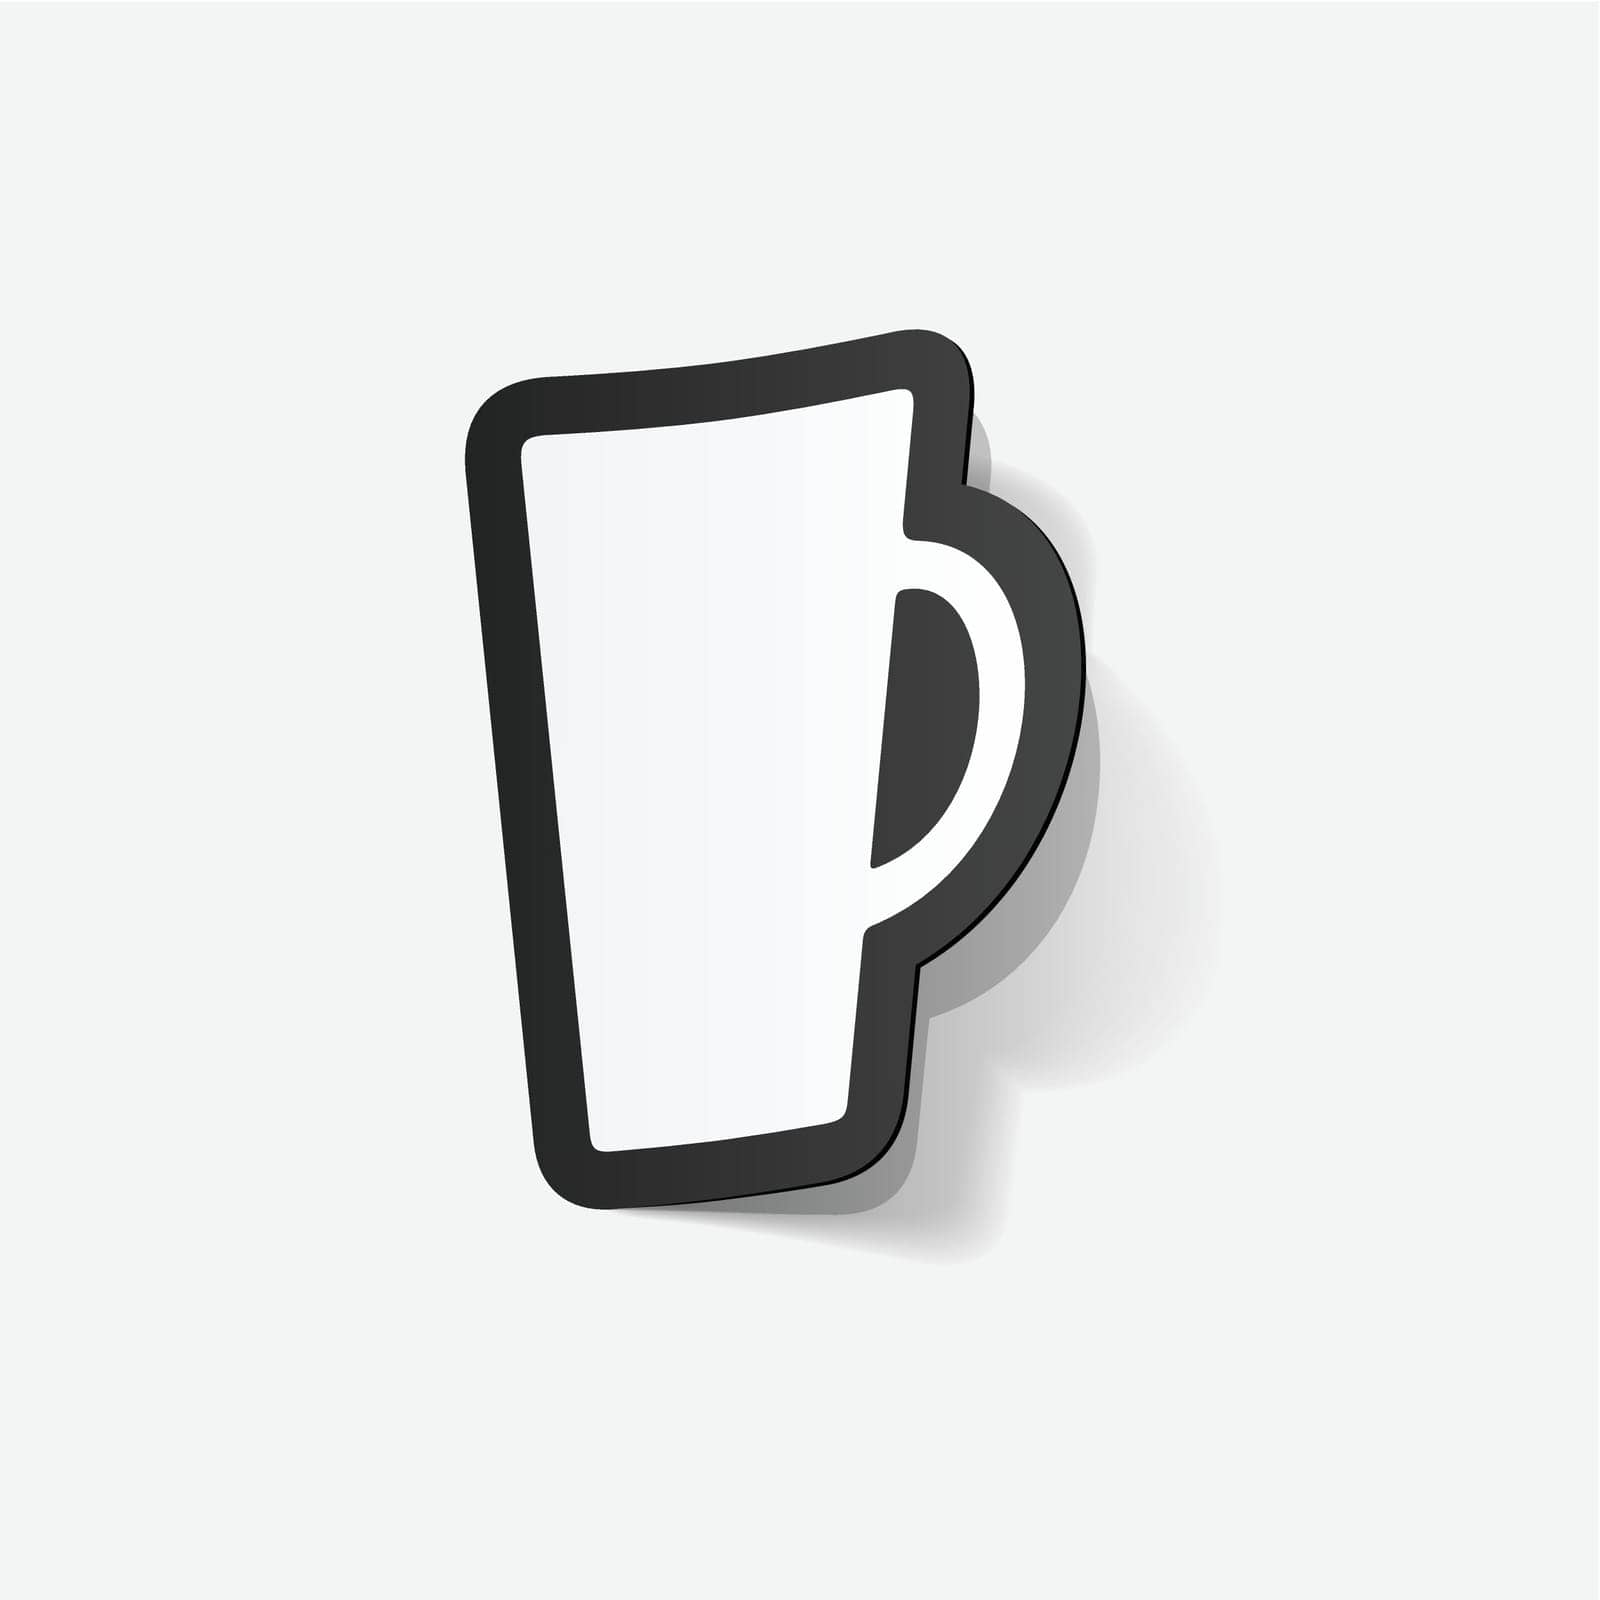 container,symbol,note,shadow,lid,icon,sign,isolated,cappuccino,memo,takeout,hot,latte,3d,white,post,paper,design,beverage,vector,bean,element,notice,announcement,espresso,business,restaurant,black,sticker,banner,label,message,food,drink,eps,10,take,plastic,cafe,background,coffee,sticky,information,illustration,mug,board,cup